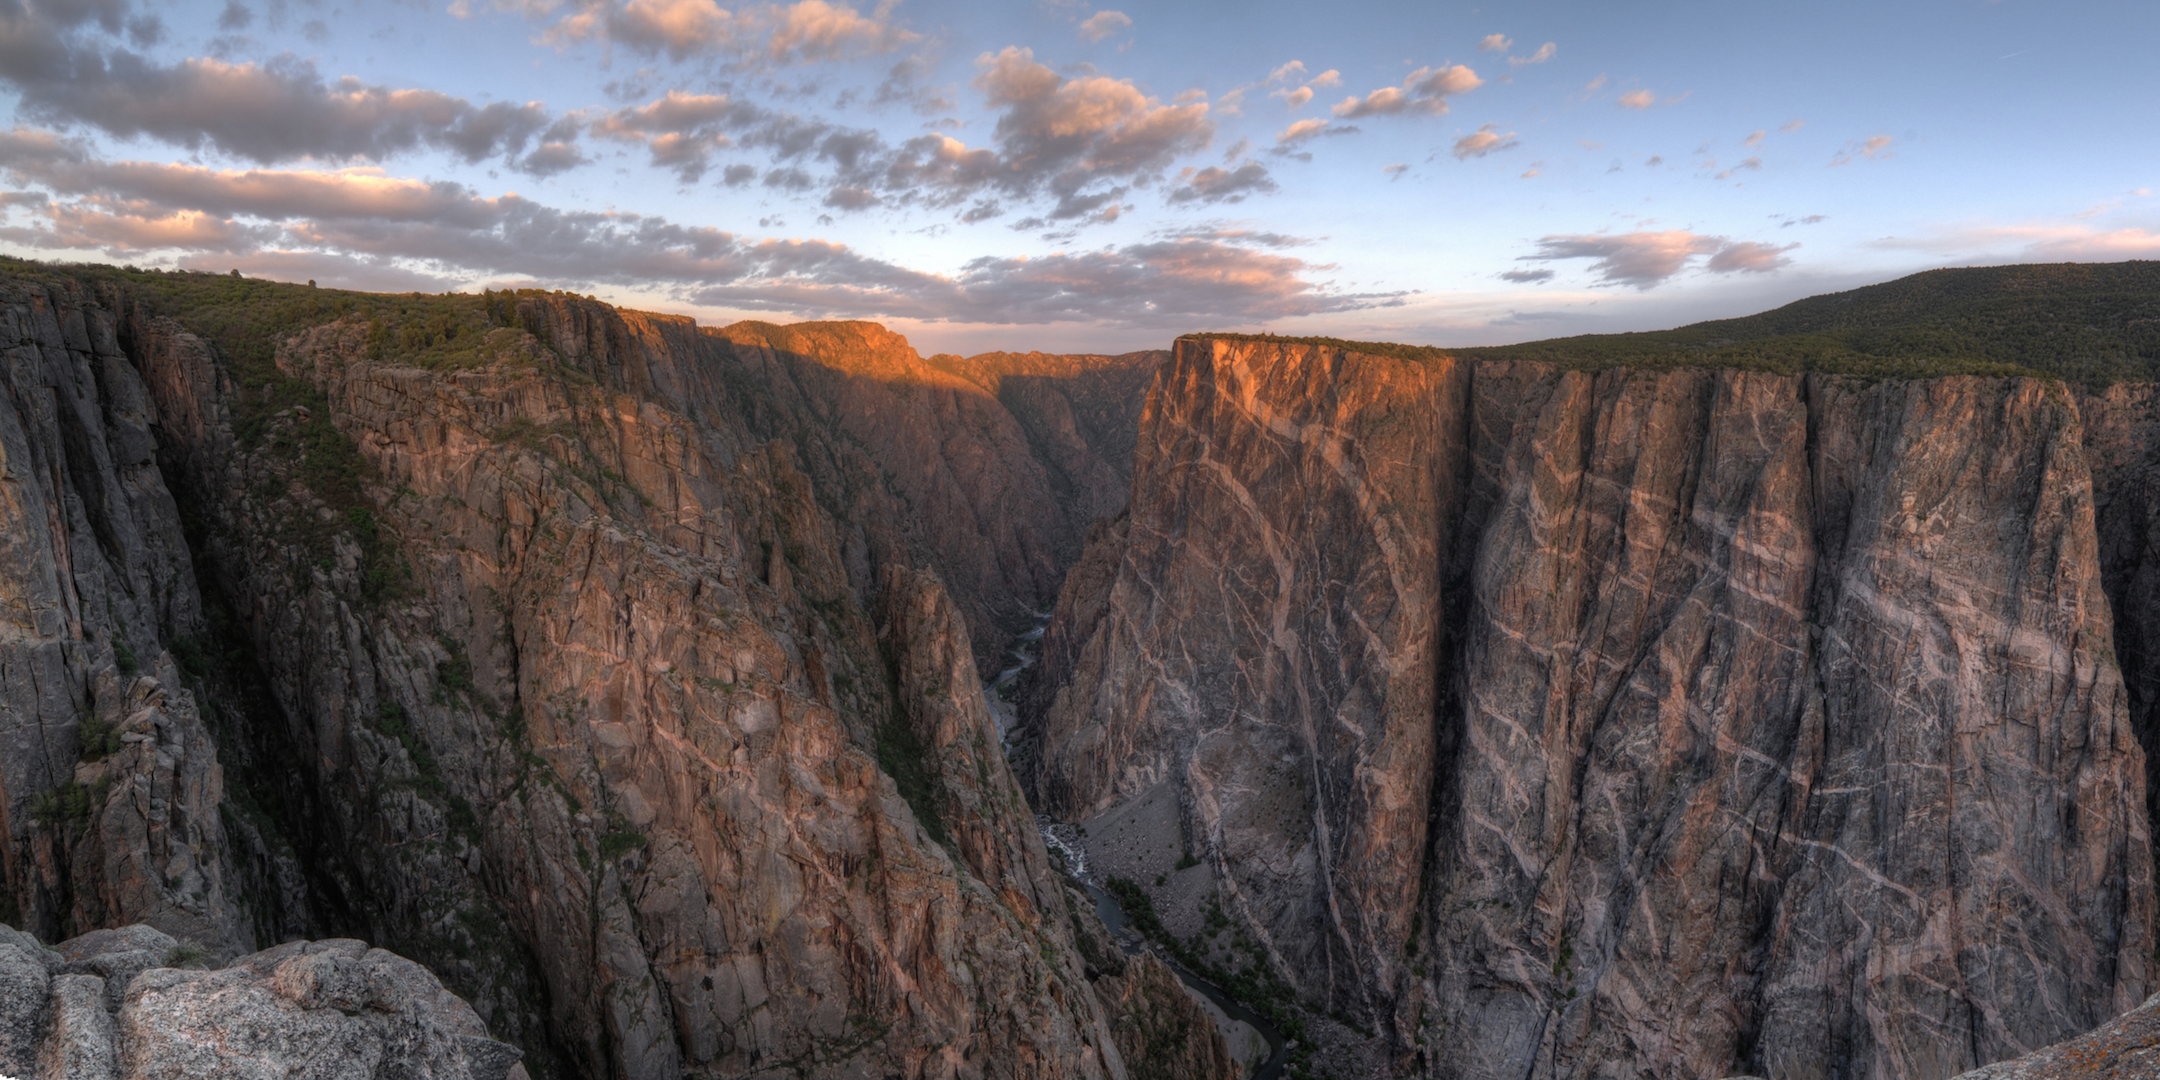 Painted Wall, Black Canyon of the Gunnison National Park